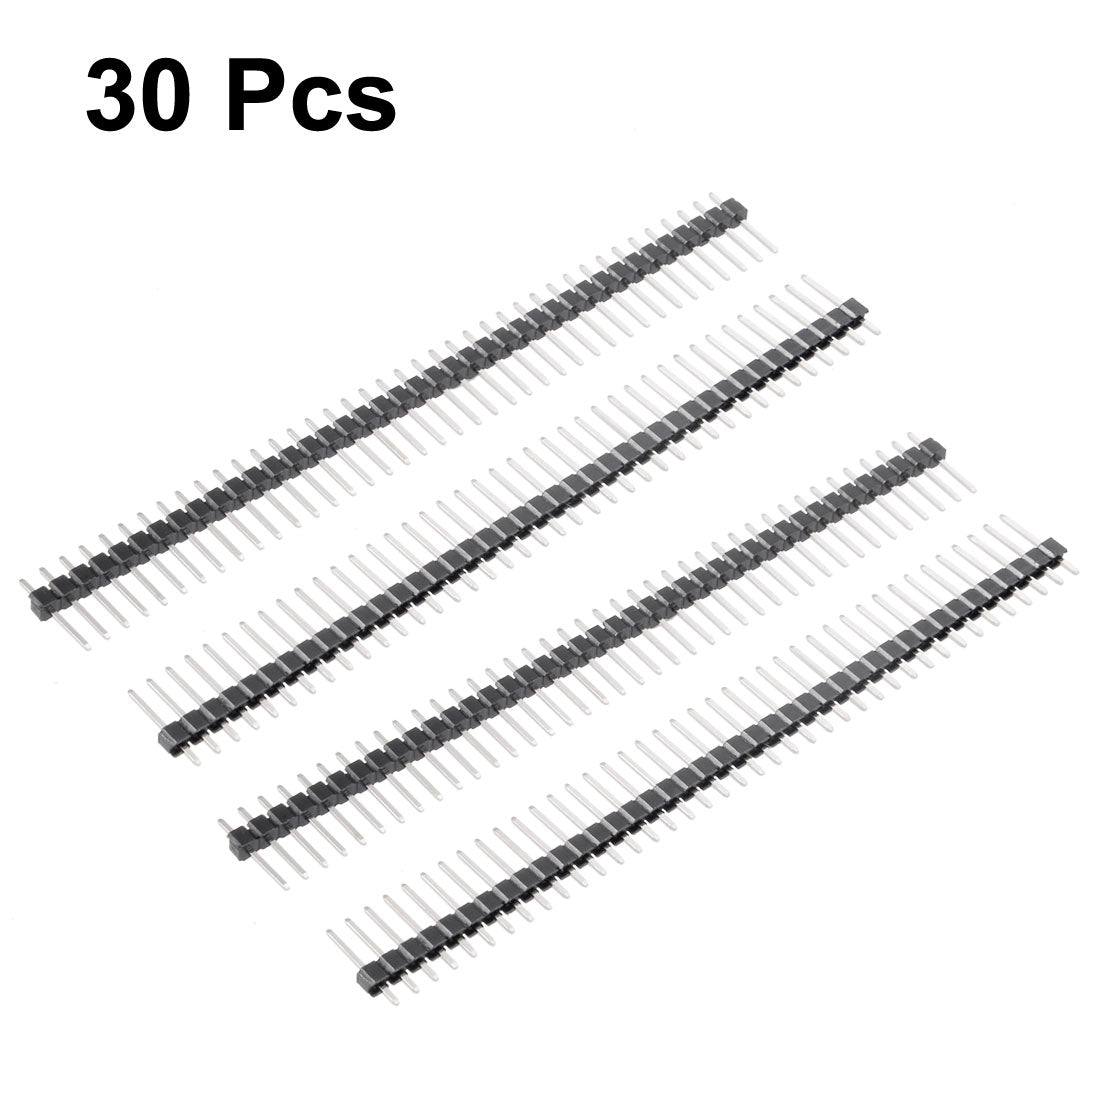 uxcell Uxcell 30Pcs 2.54mm Pitch 40-Pin 14mm Length Single Row Straight Connector Pin Header Strip for Arduino Prototype Shield